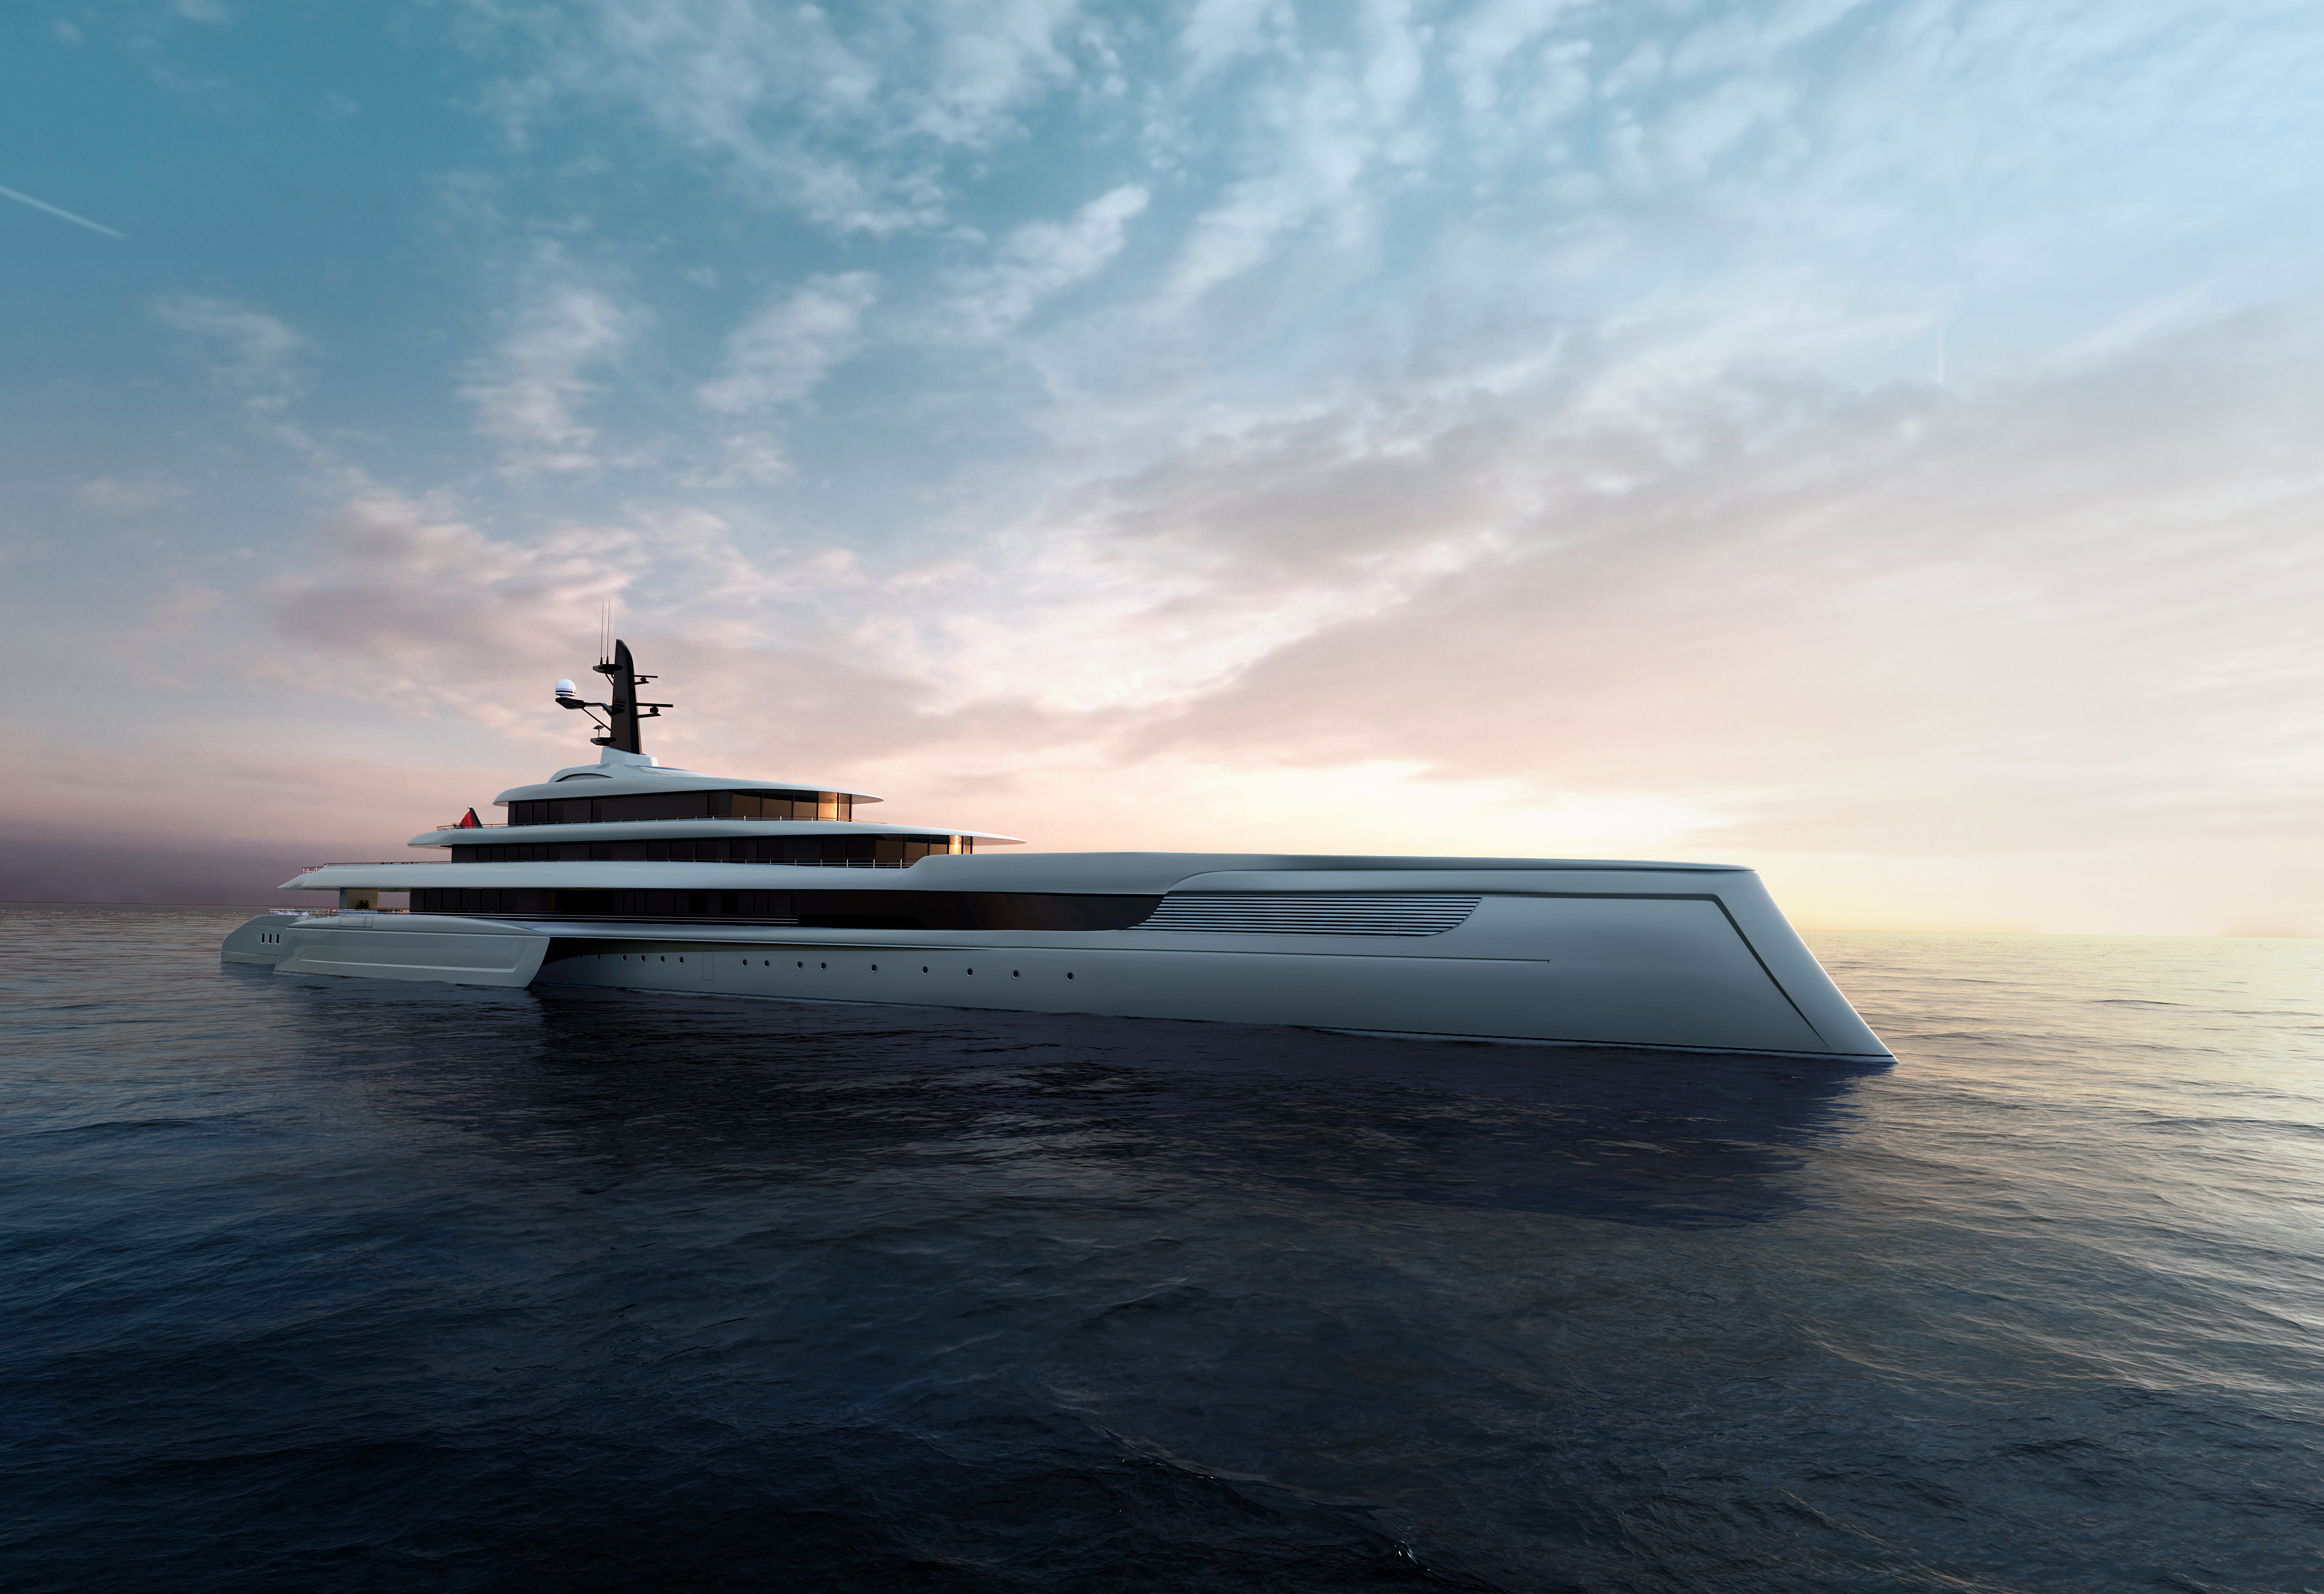 A Symphony of Art & Science: Introducing Spear, the 140m trimaran yacht concept. A new collaboration between T. Fotiadis Design & Lateral Naval Architects.